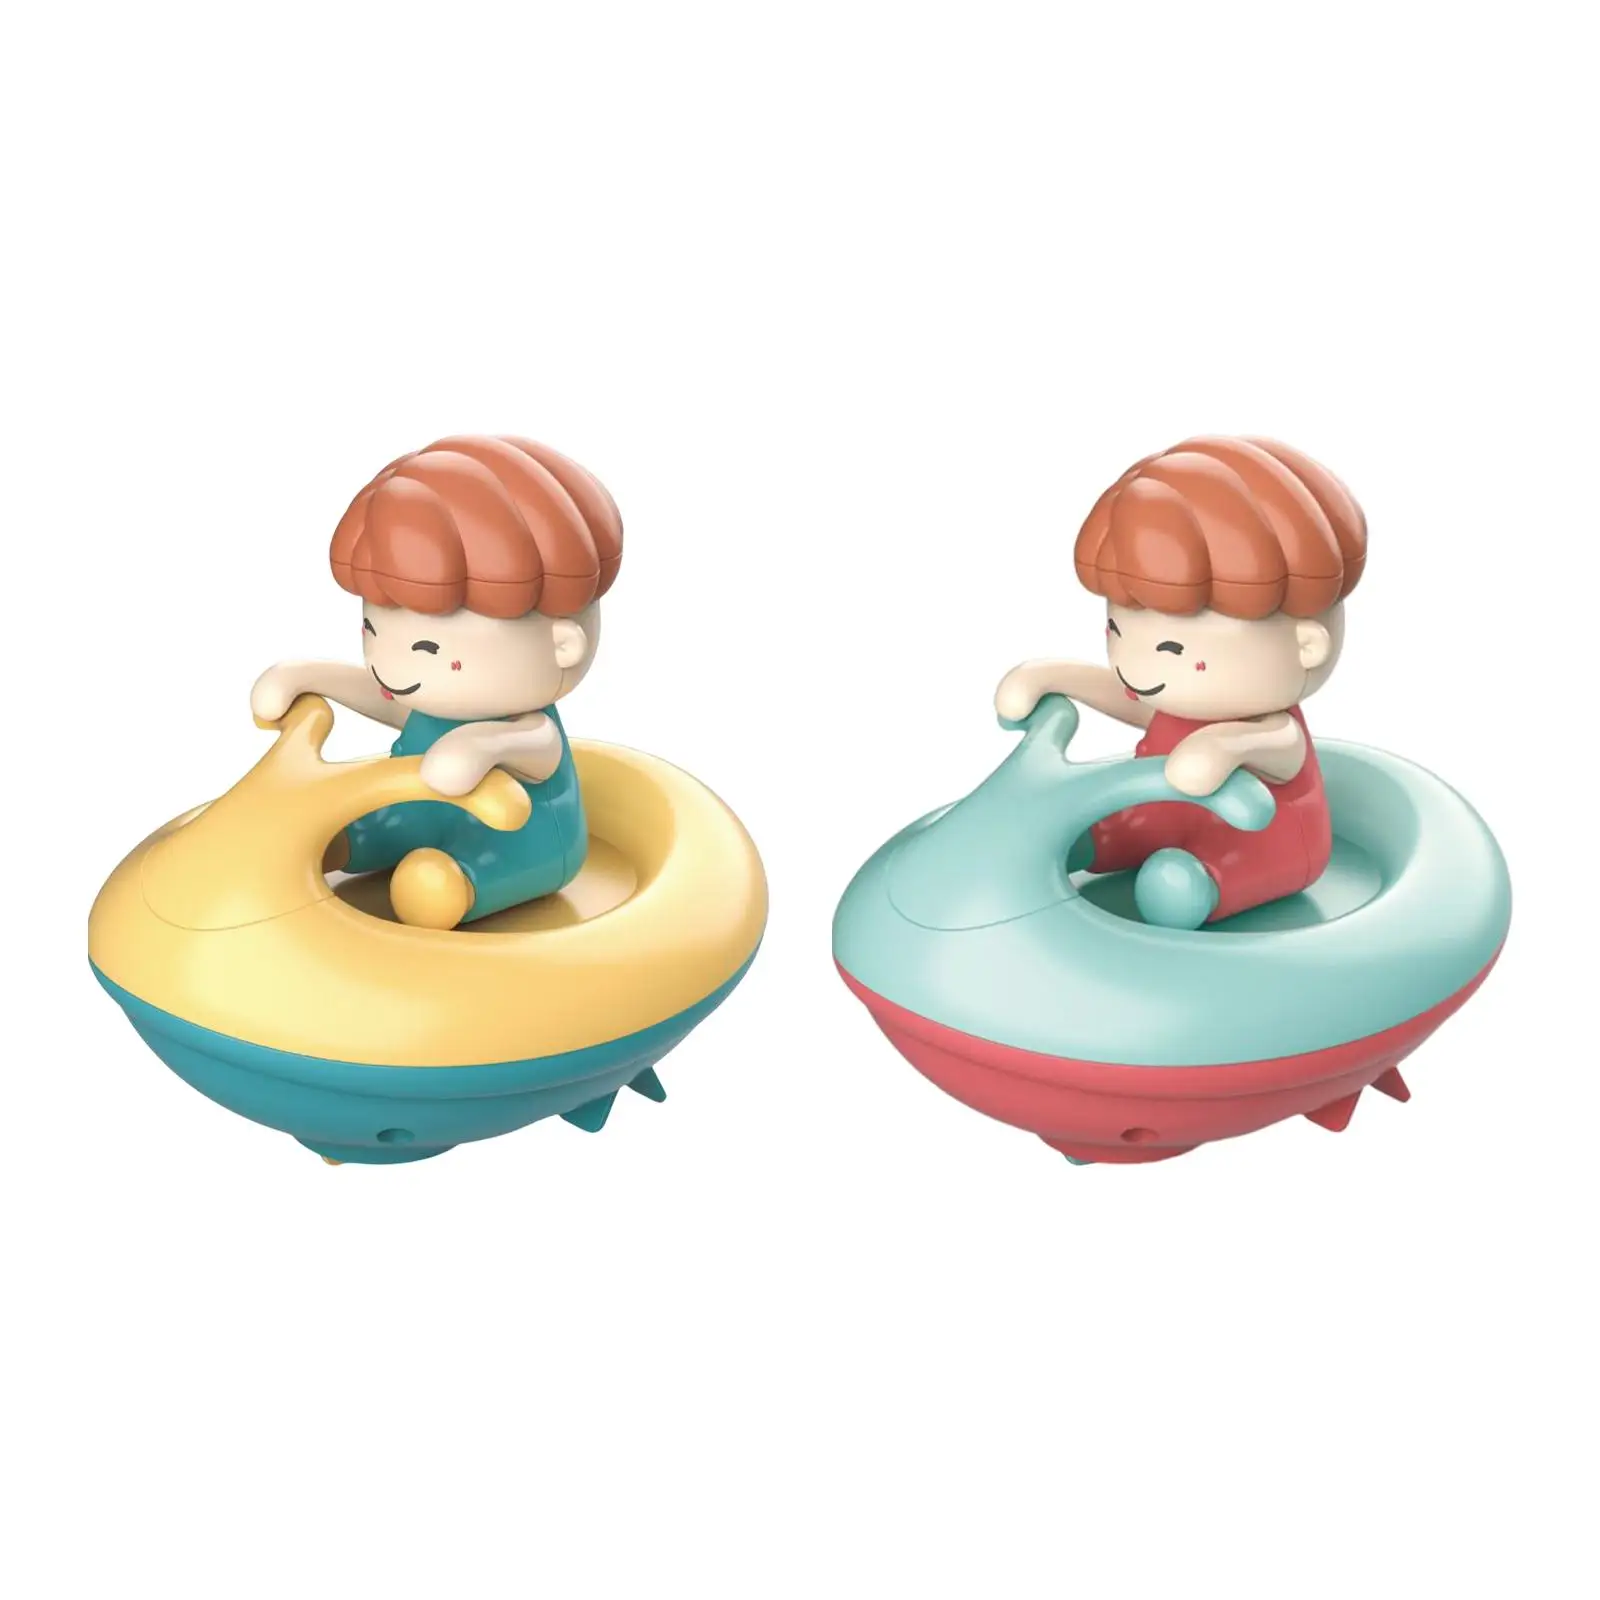 

Educational Baby Bath Toy Surf Boat, Windup Games Floating Clockwork Simulation for Toddlers Bathtub Boys Children Swimming Pool